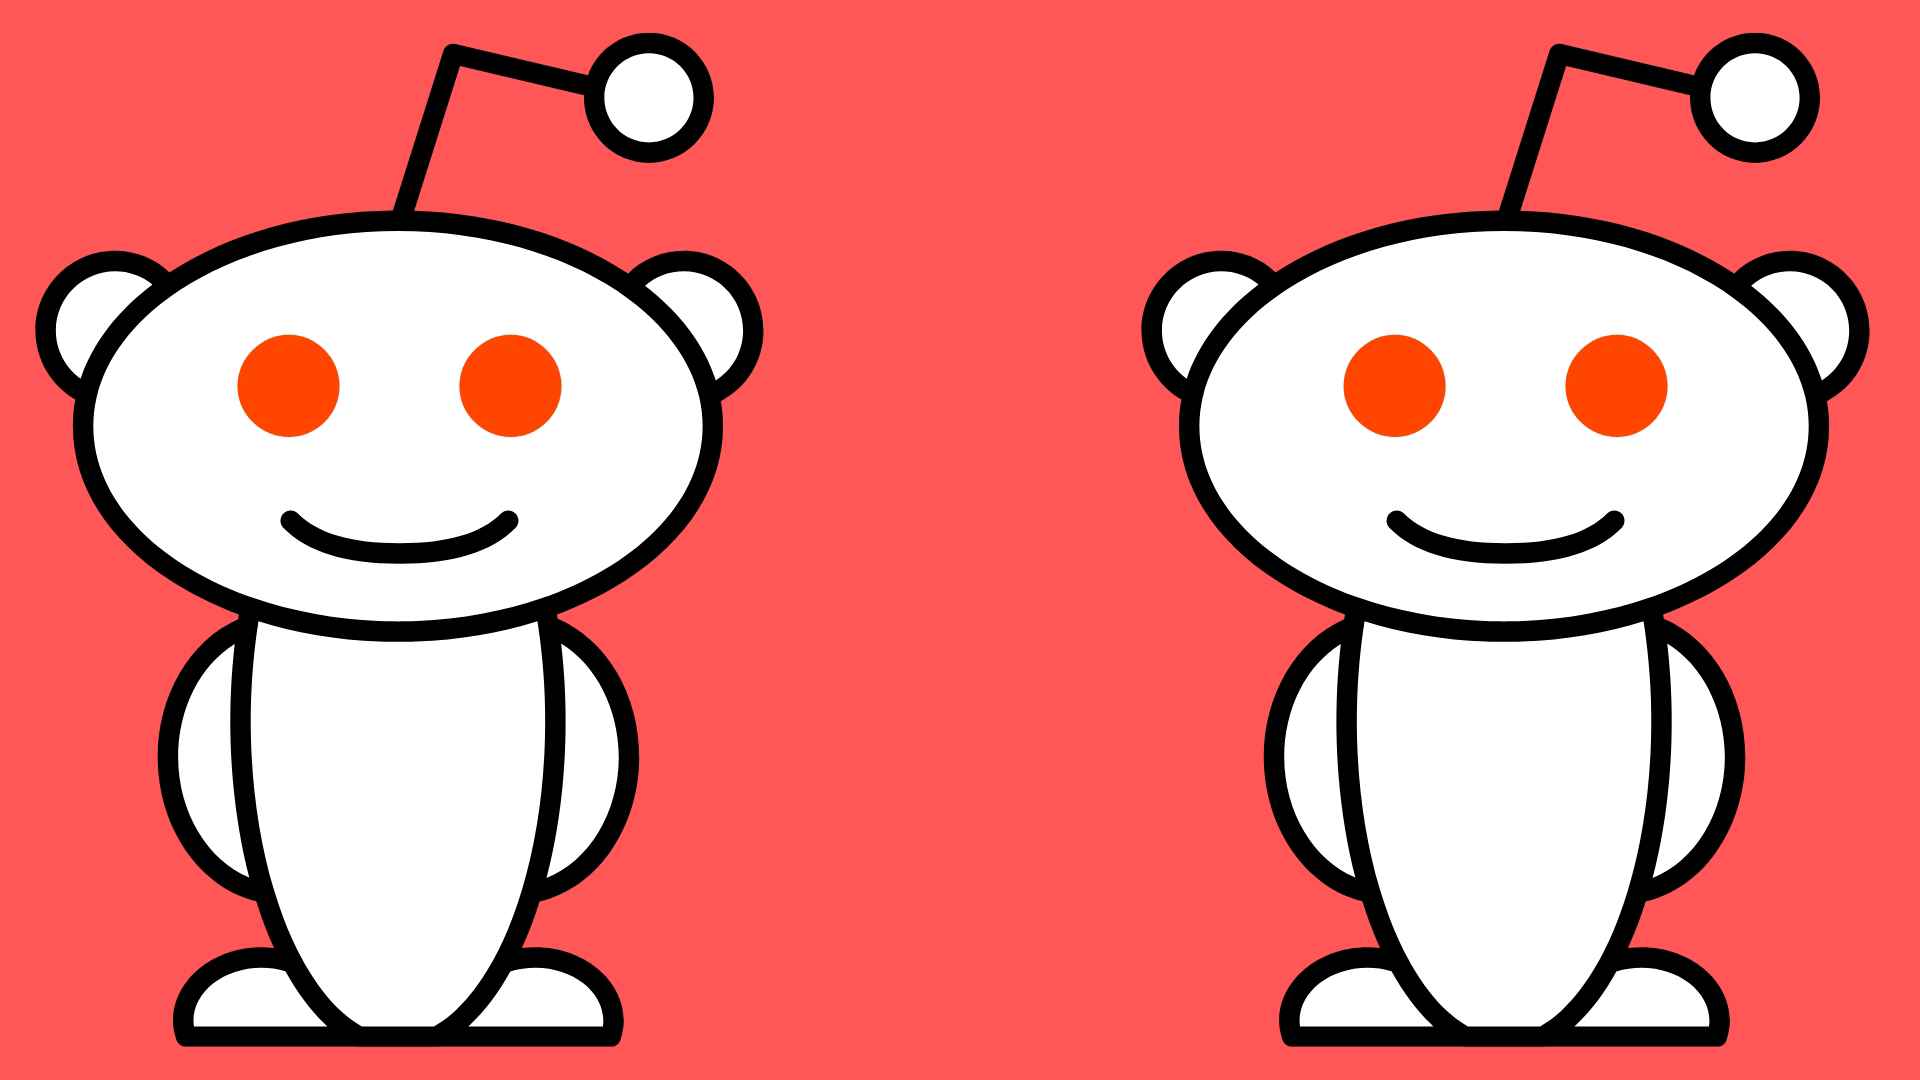 Can you make friends or connect with people on Reddit?